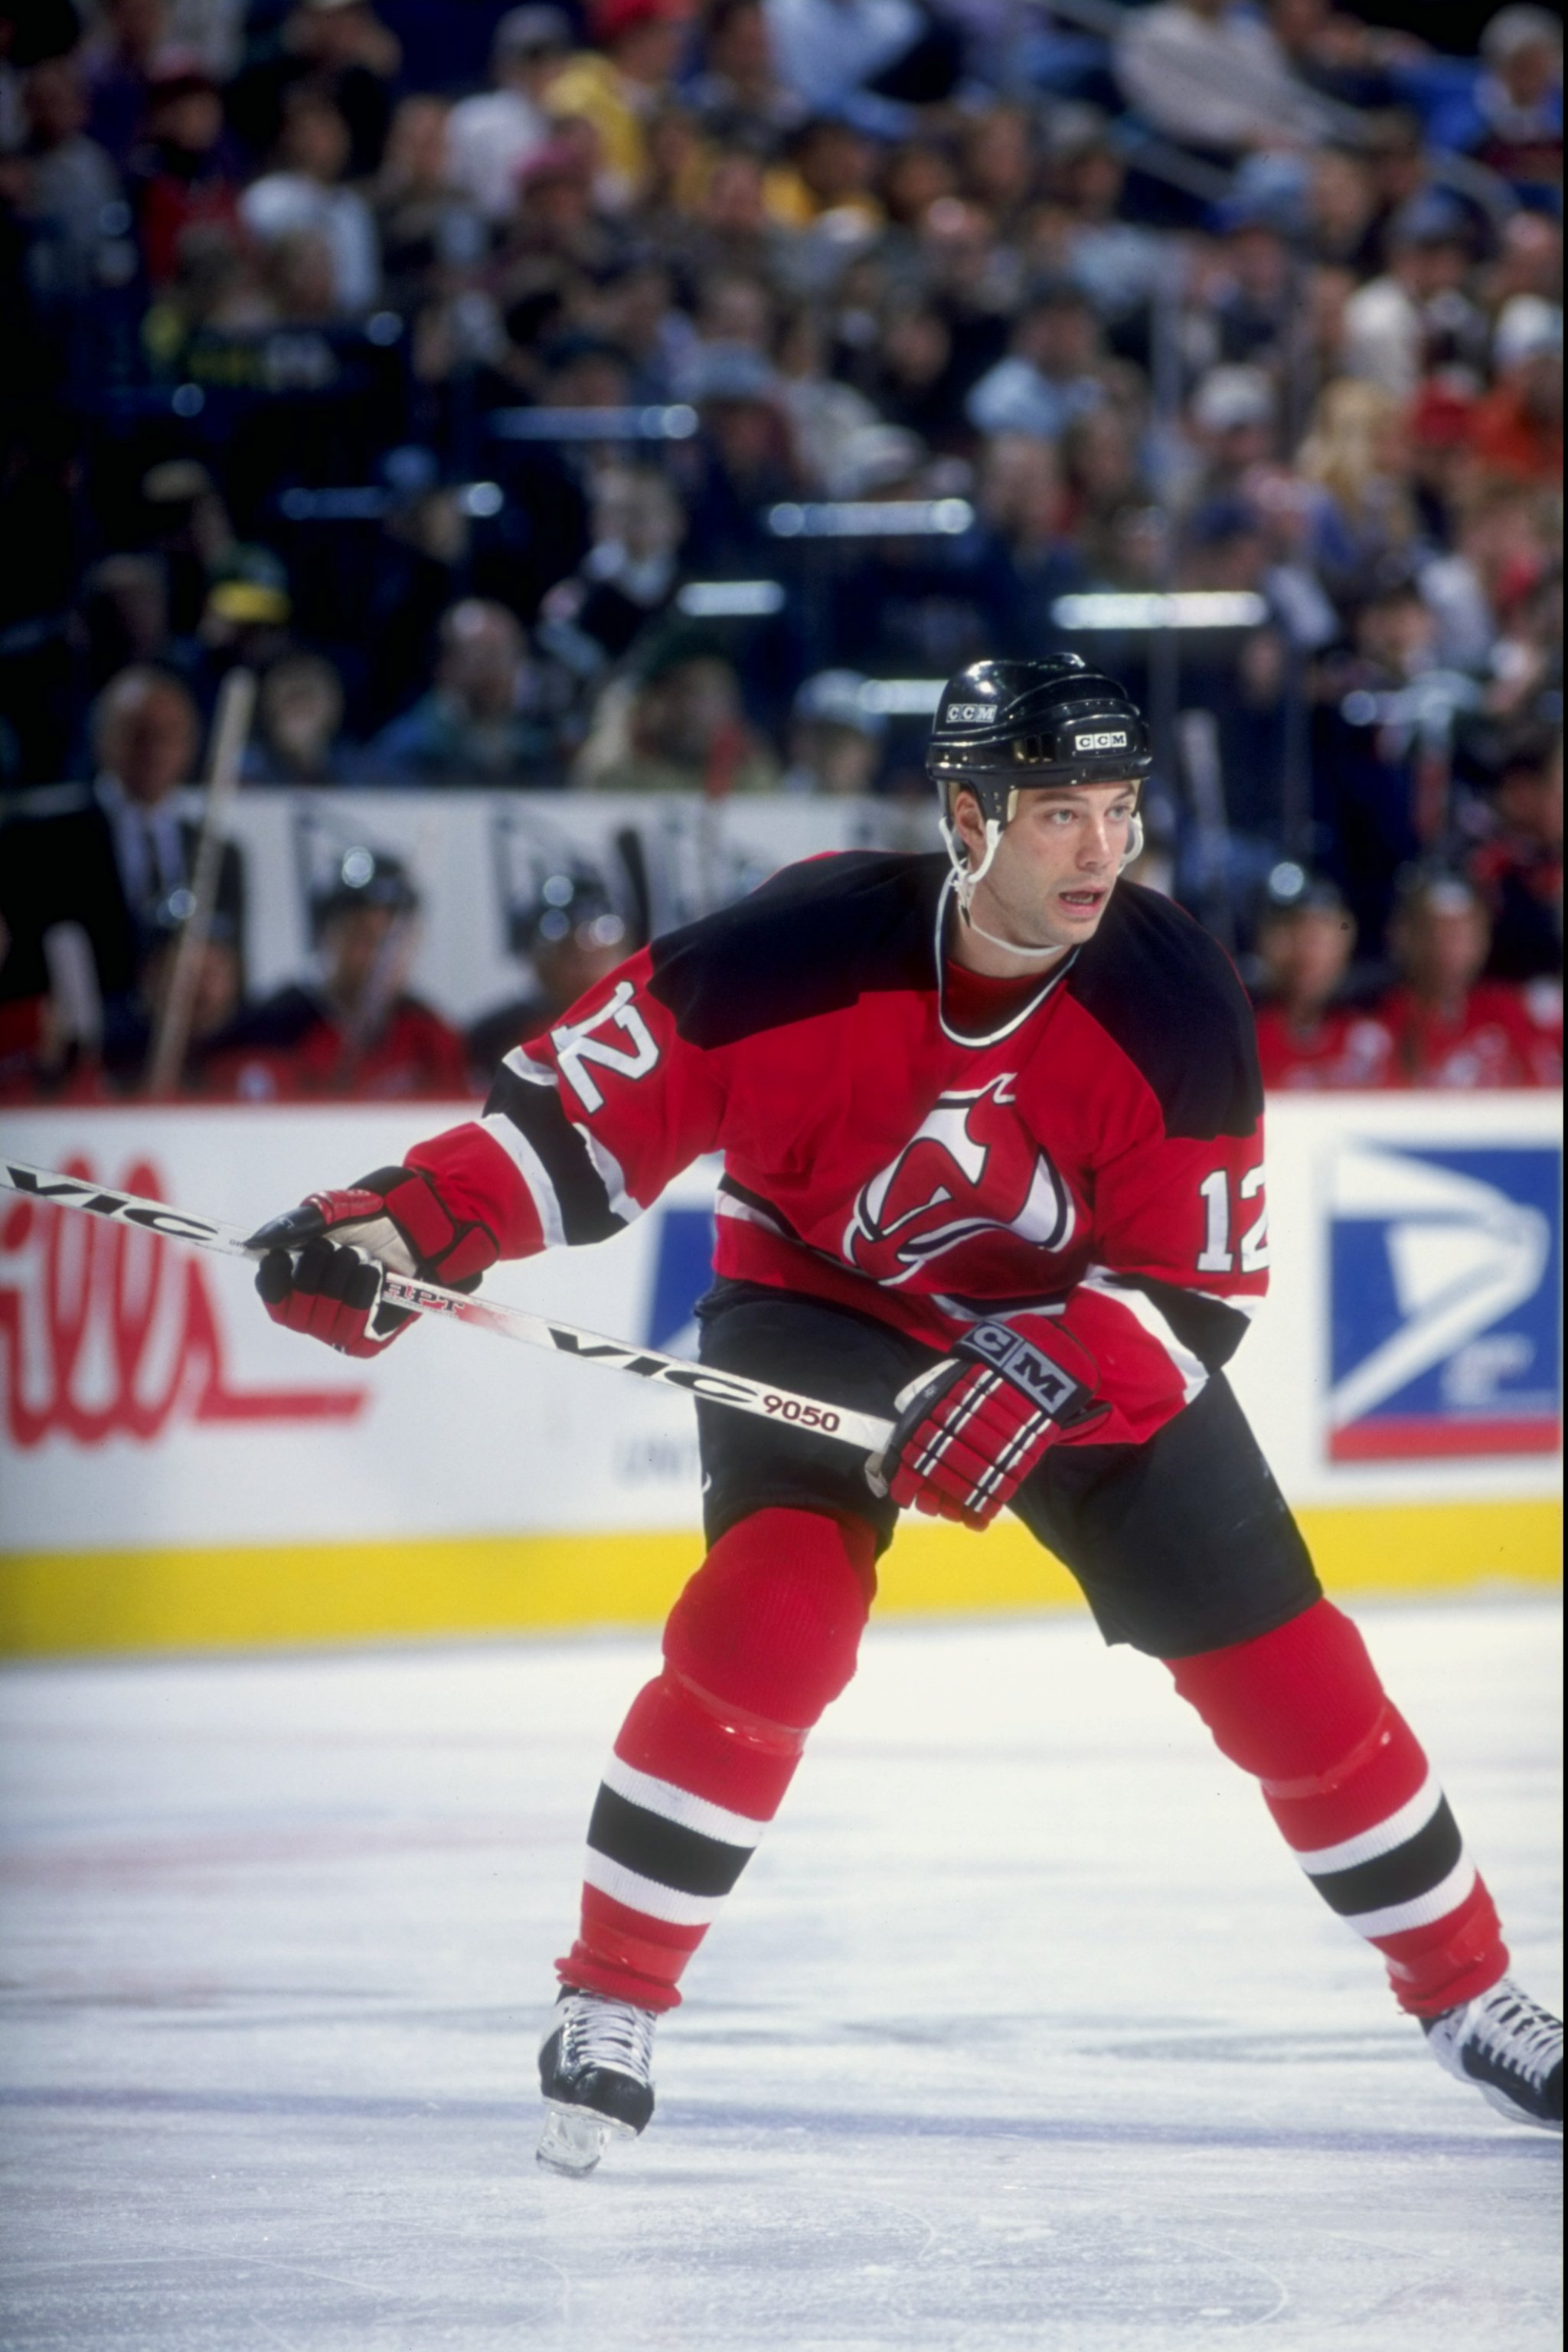 Relive the Devils' road to the Stanley Cup title in 1995 